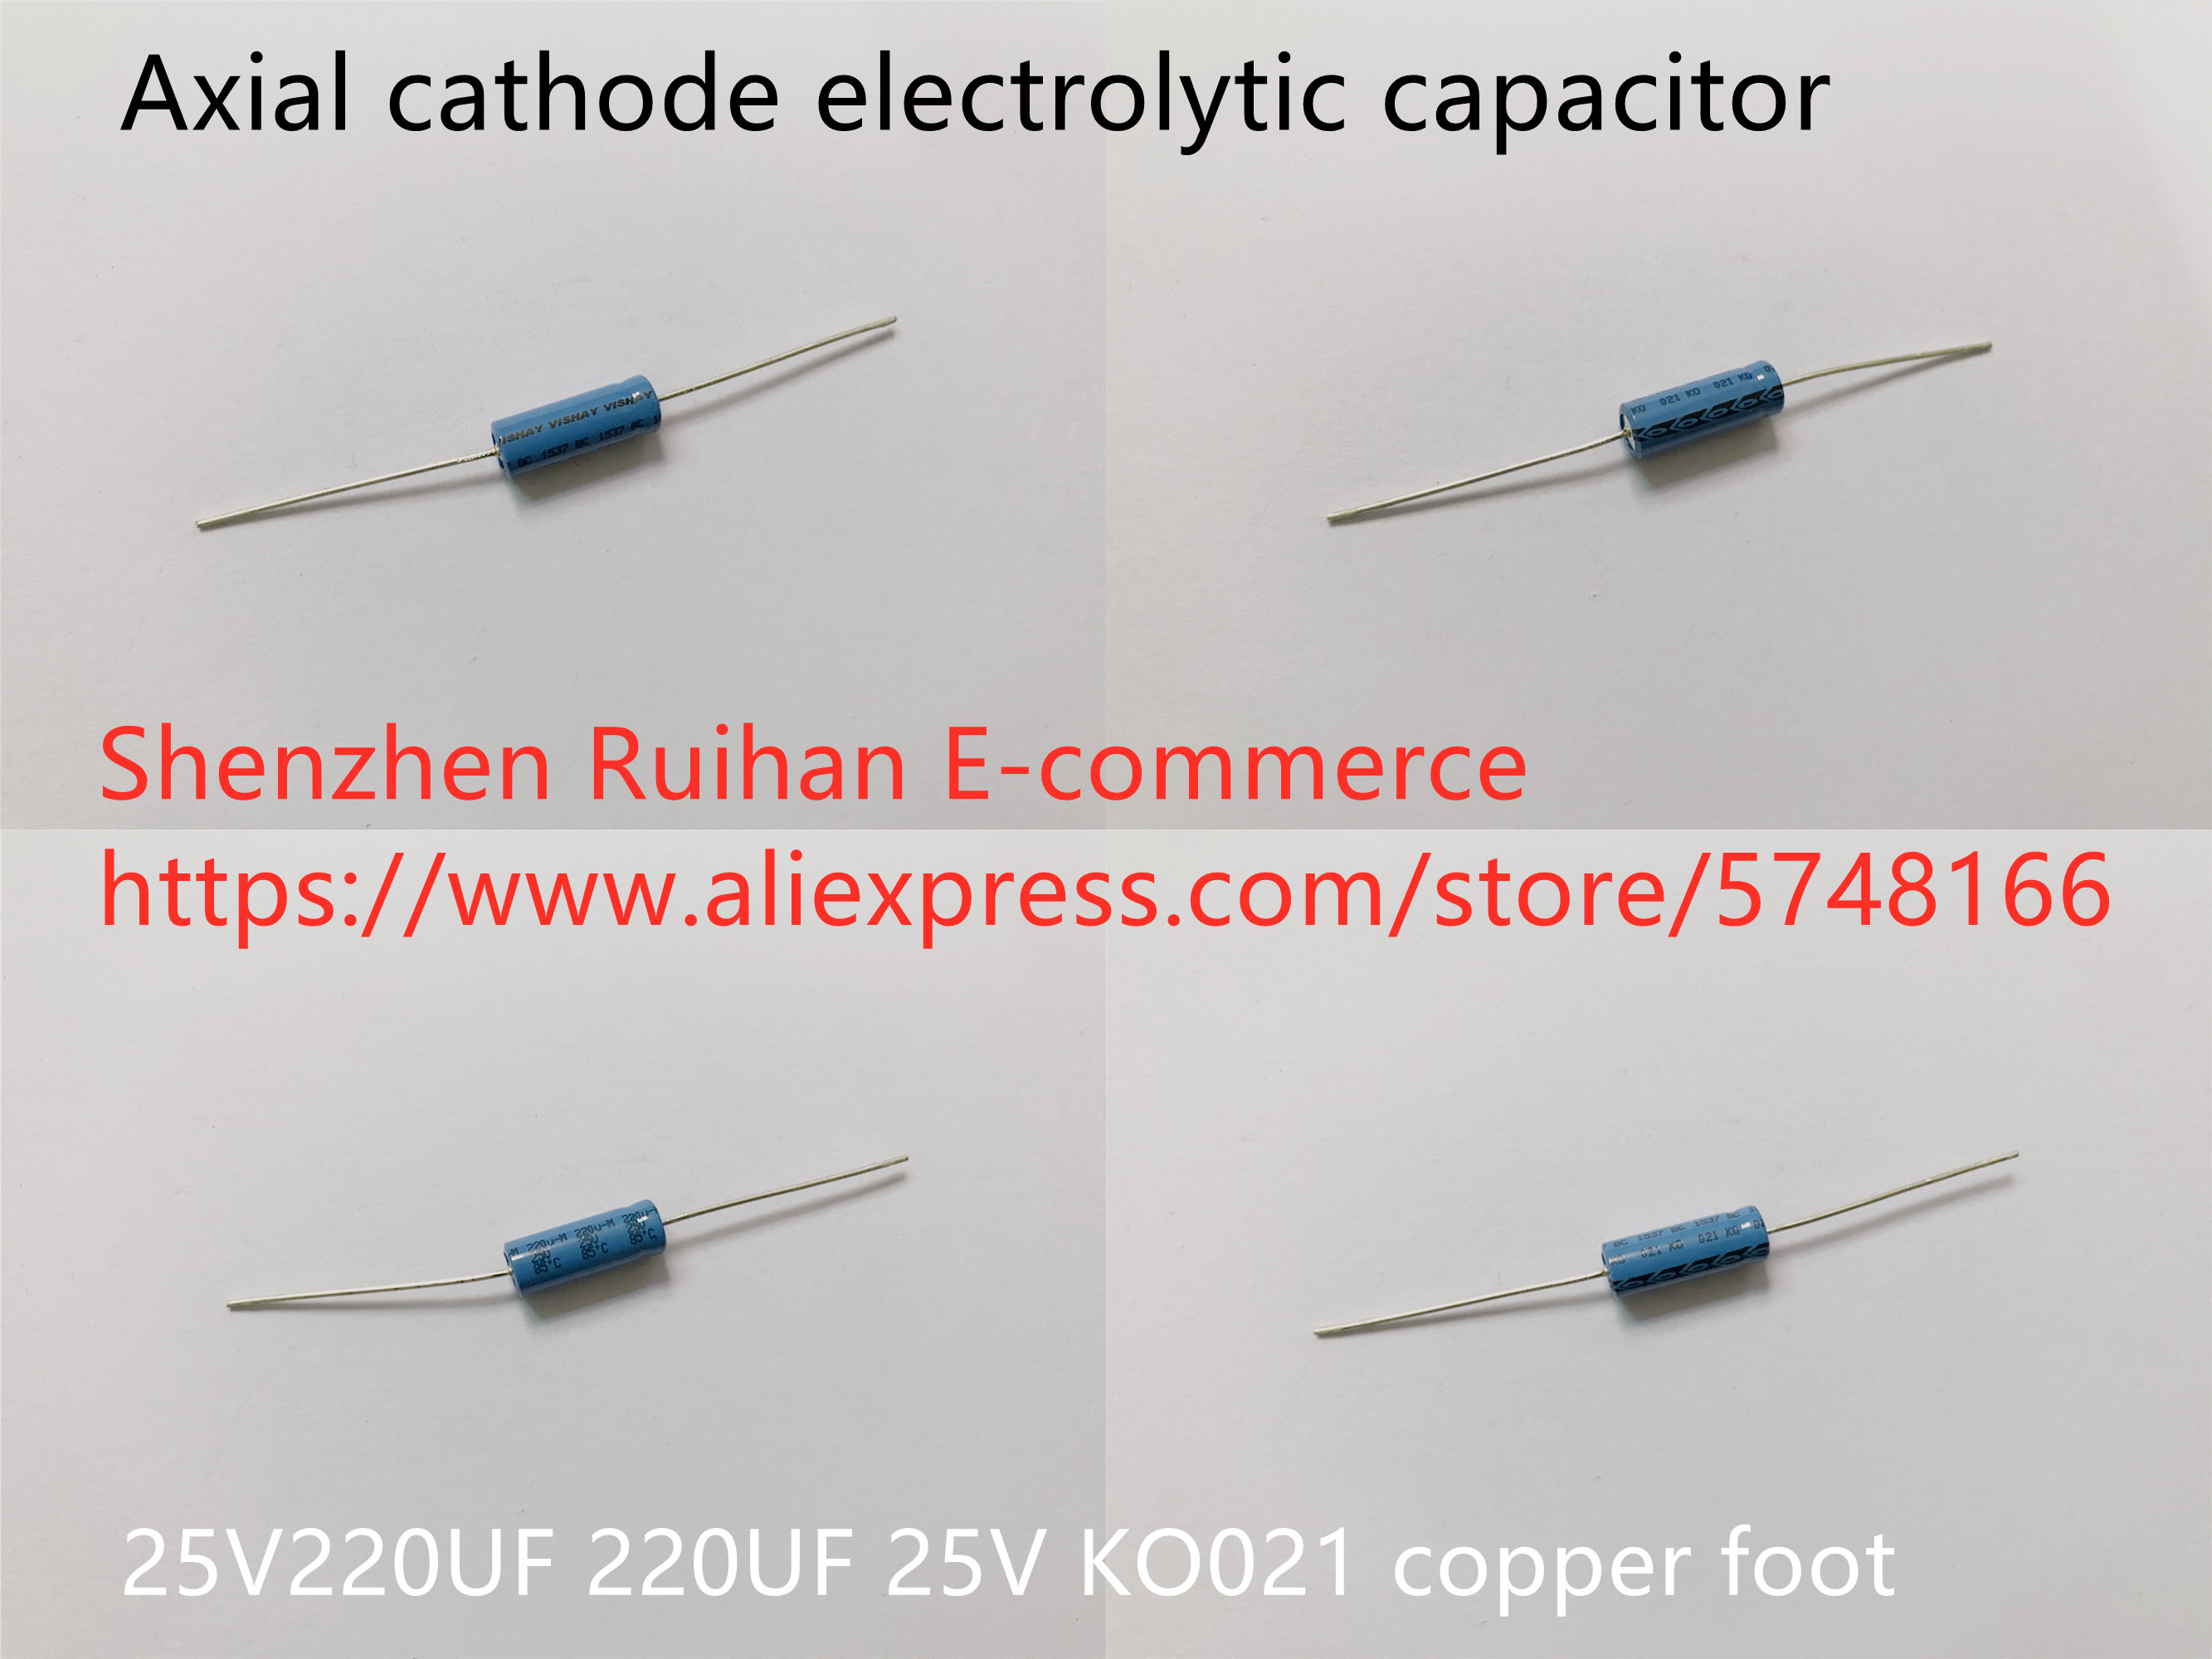 Original new 100% Europe import 25V220UF 220UF 25V KO021 copper foot axial cathode electrolytic capacitor (Inductor)